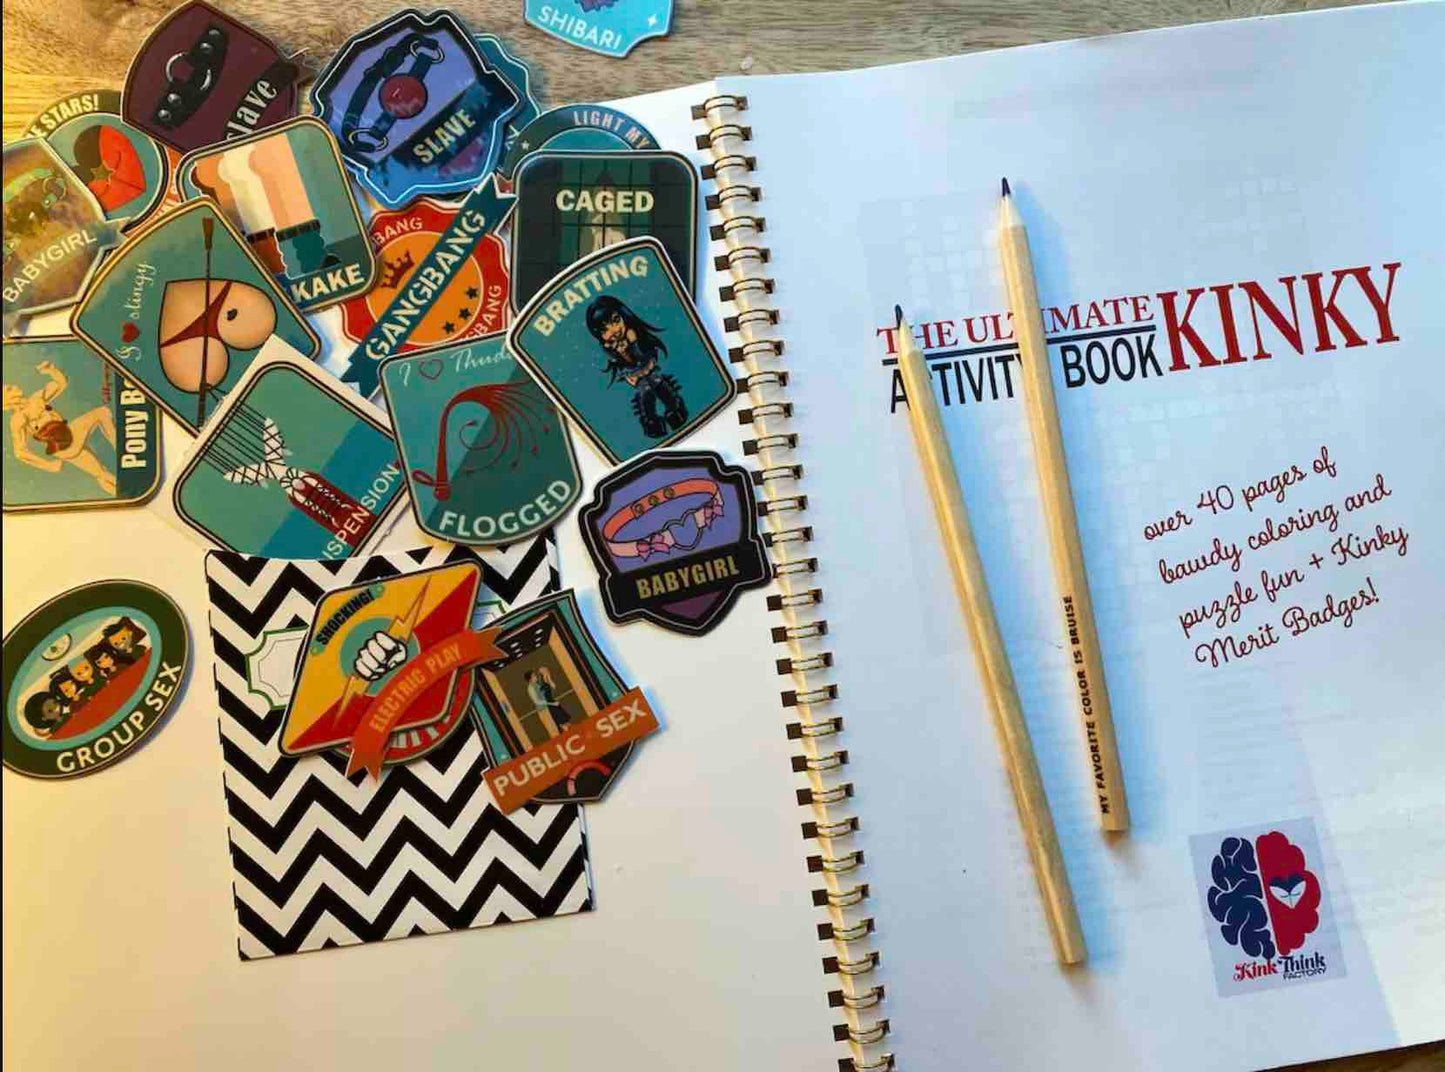 A page from the Ultimate Kinky Activity Book: On the left is a pile of kinky merit badge stickers and the right page is the opening cover for the book.